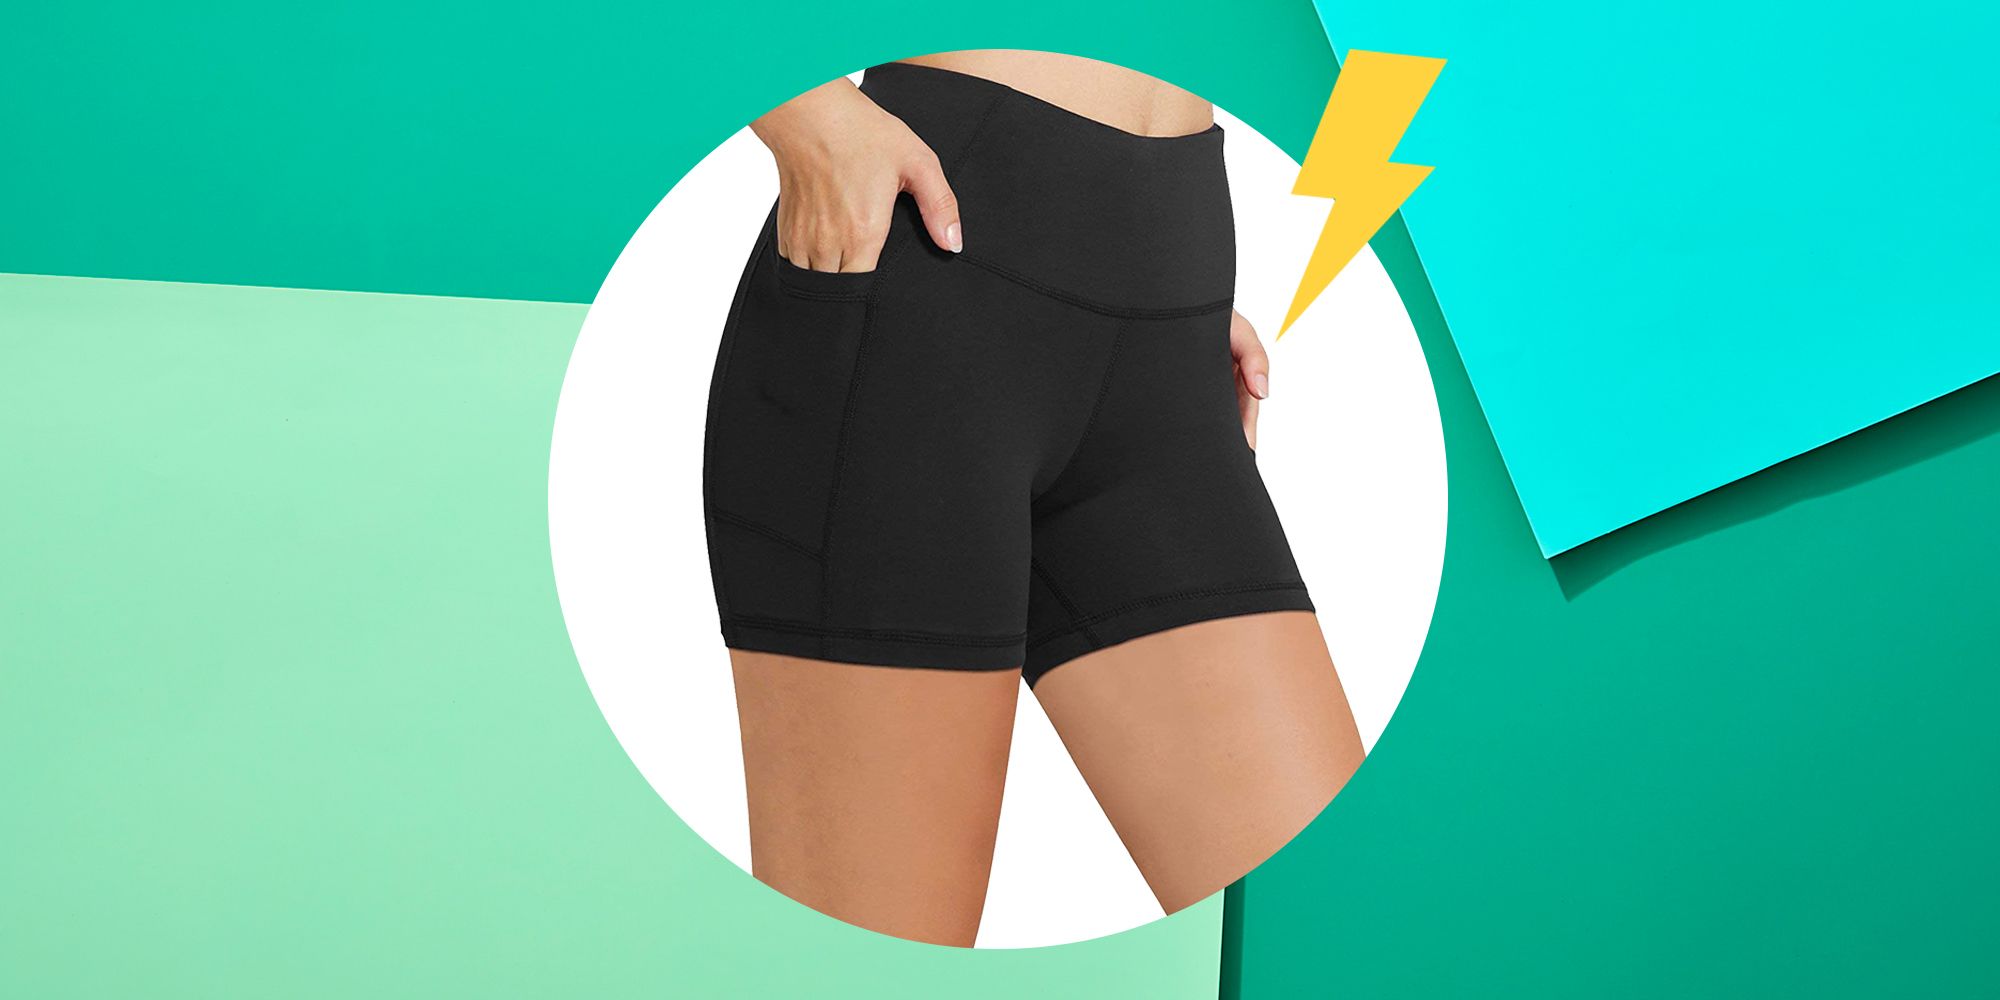 PAIZH Yoga Lounge Shorts for Women Gym Workout Running Biker Shorts with Pockets 